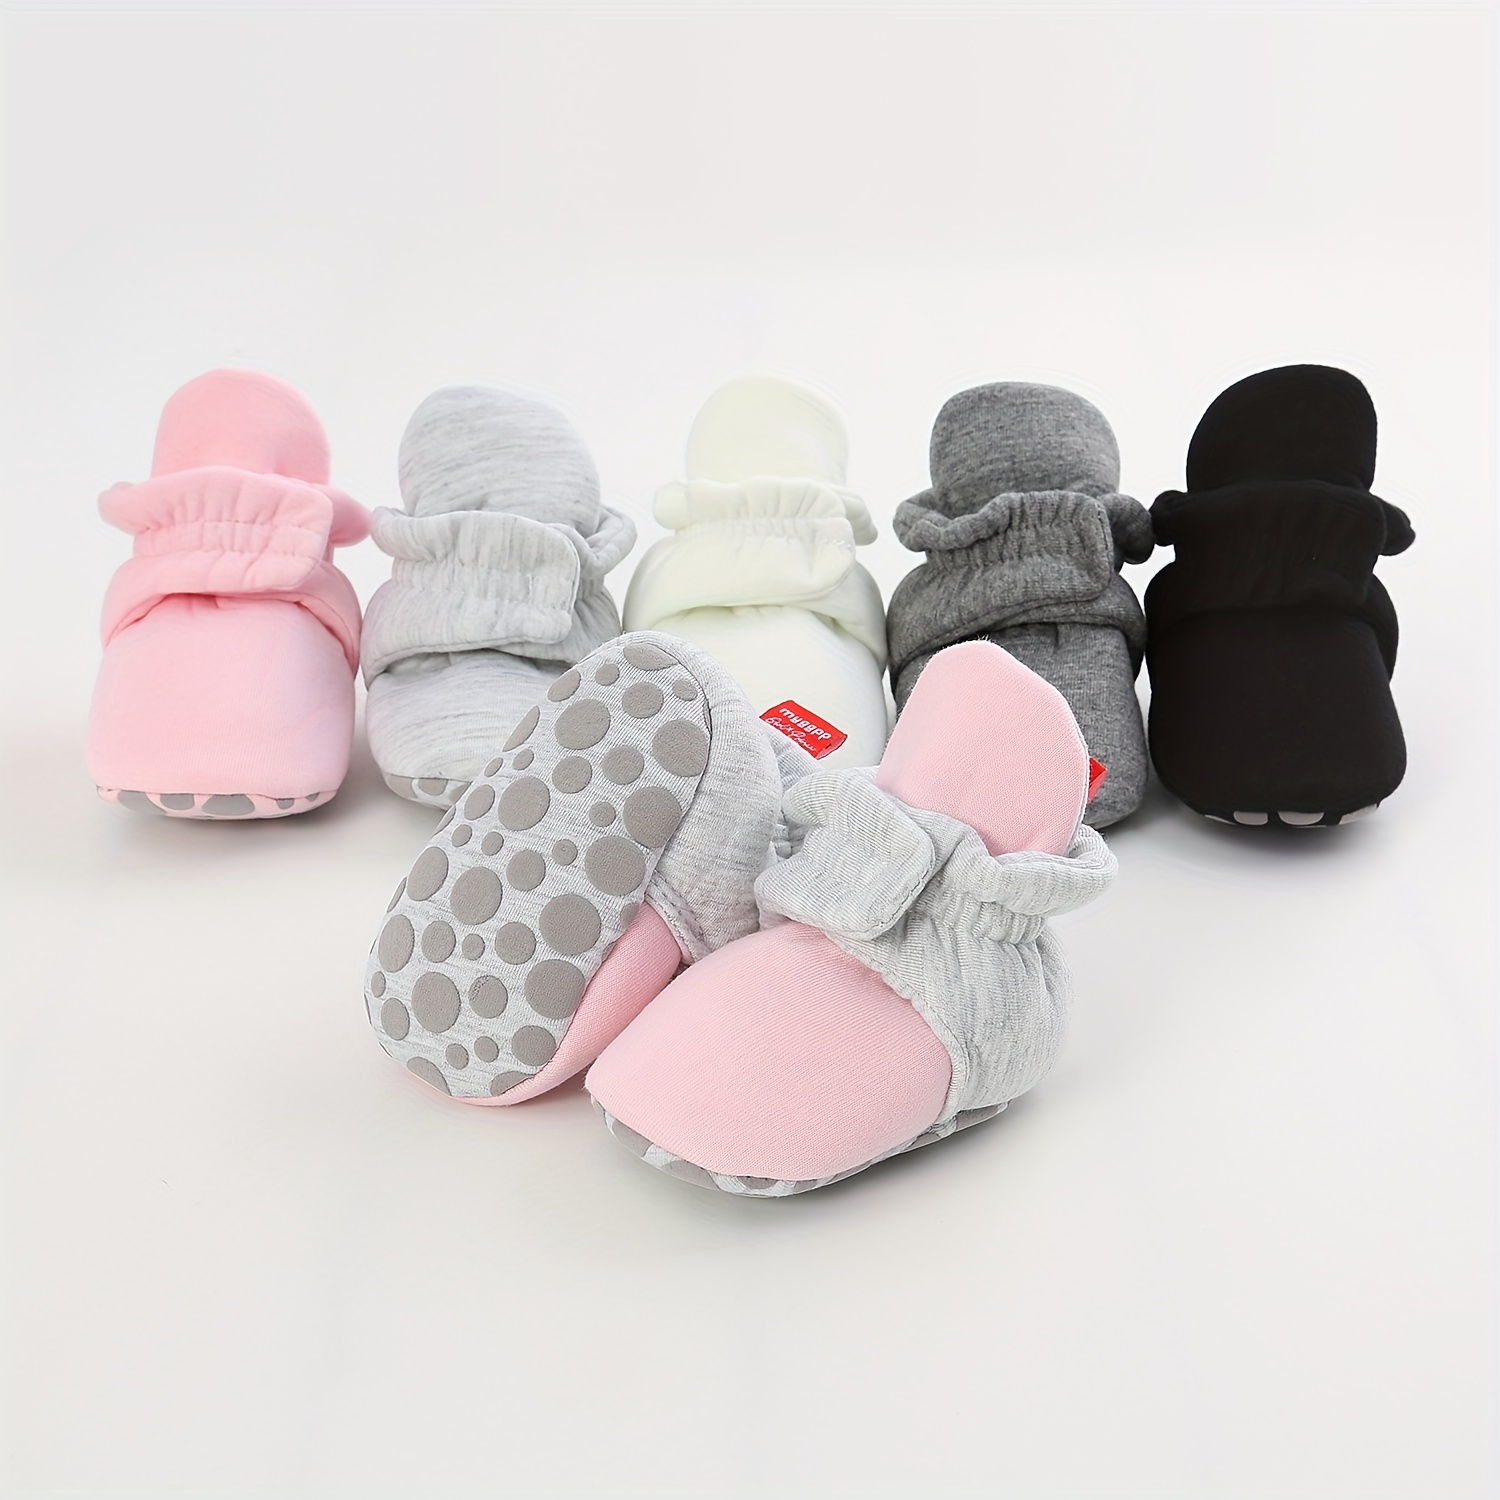 Baby Girl Soft Sole Bow Sandals, In Stock and Ships Fast!-sgquangbinhtourist.com.vn